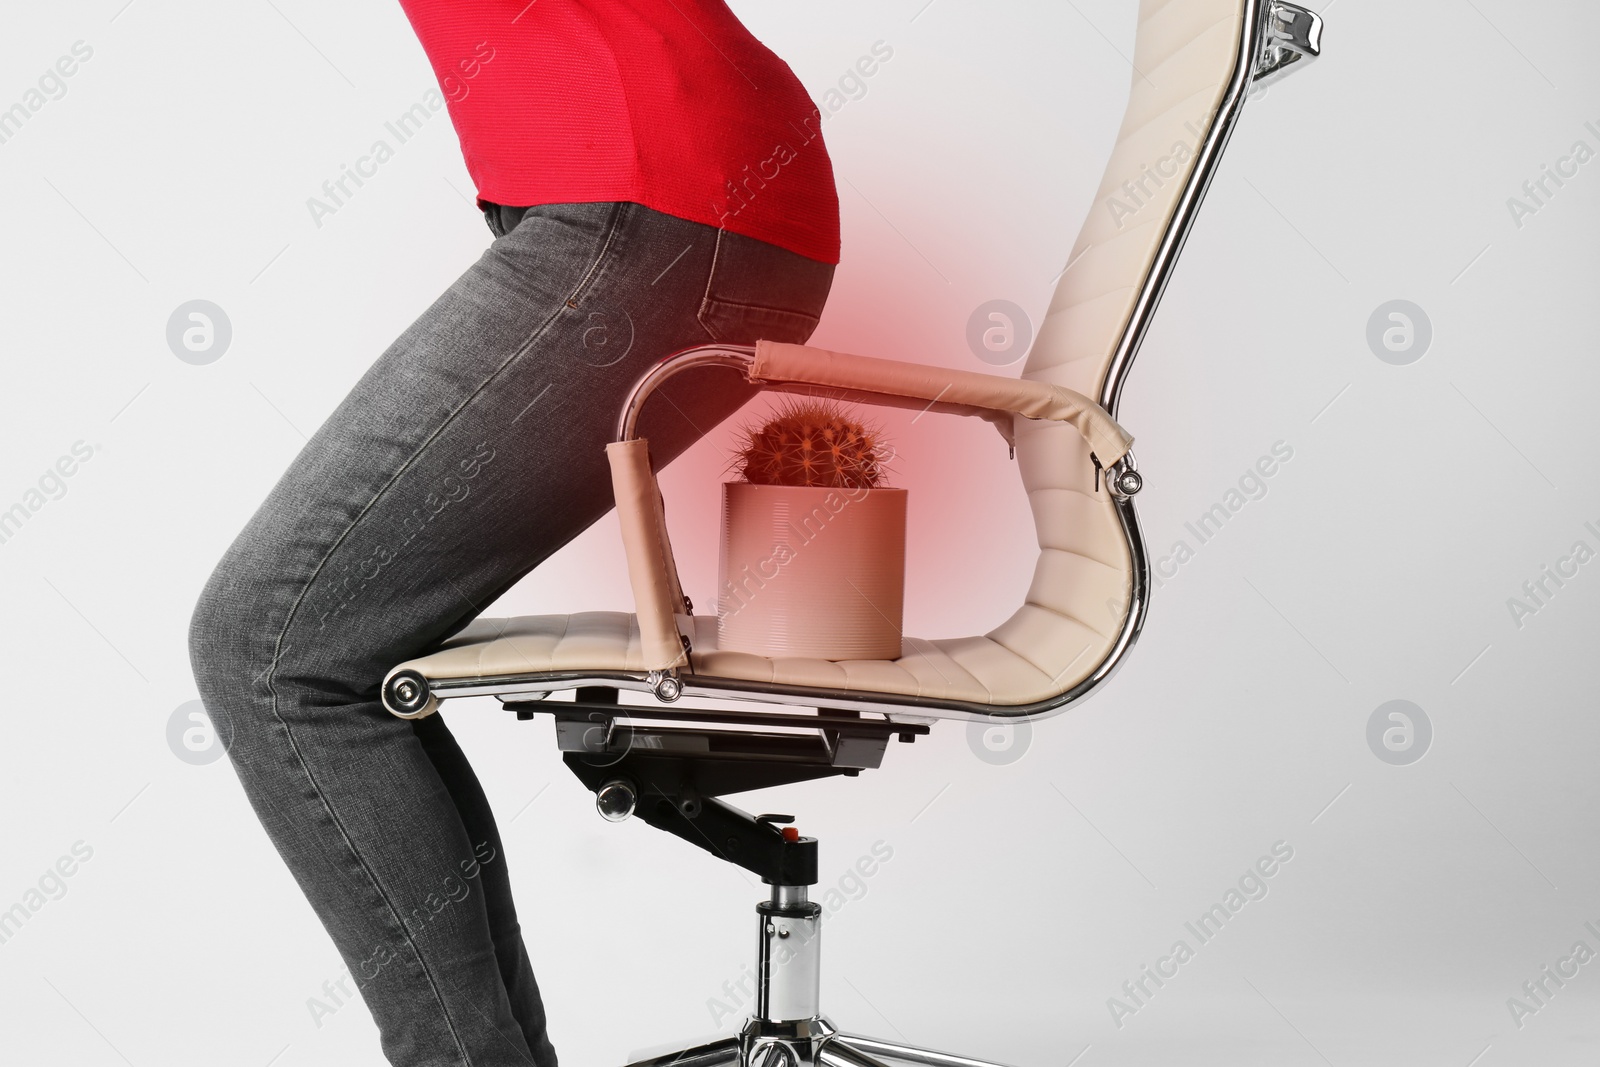 Image of Hemorrhoid concept. Woman sitting down on chair with cactus against white background, closeup